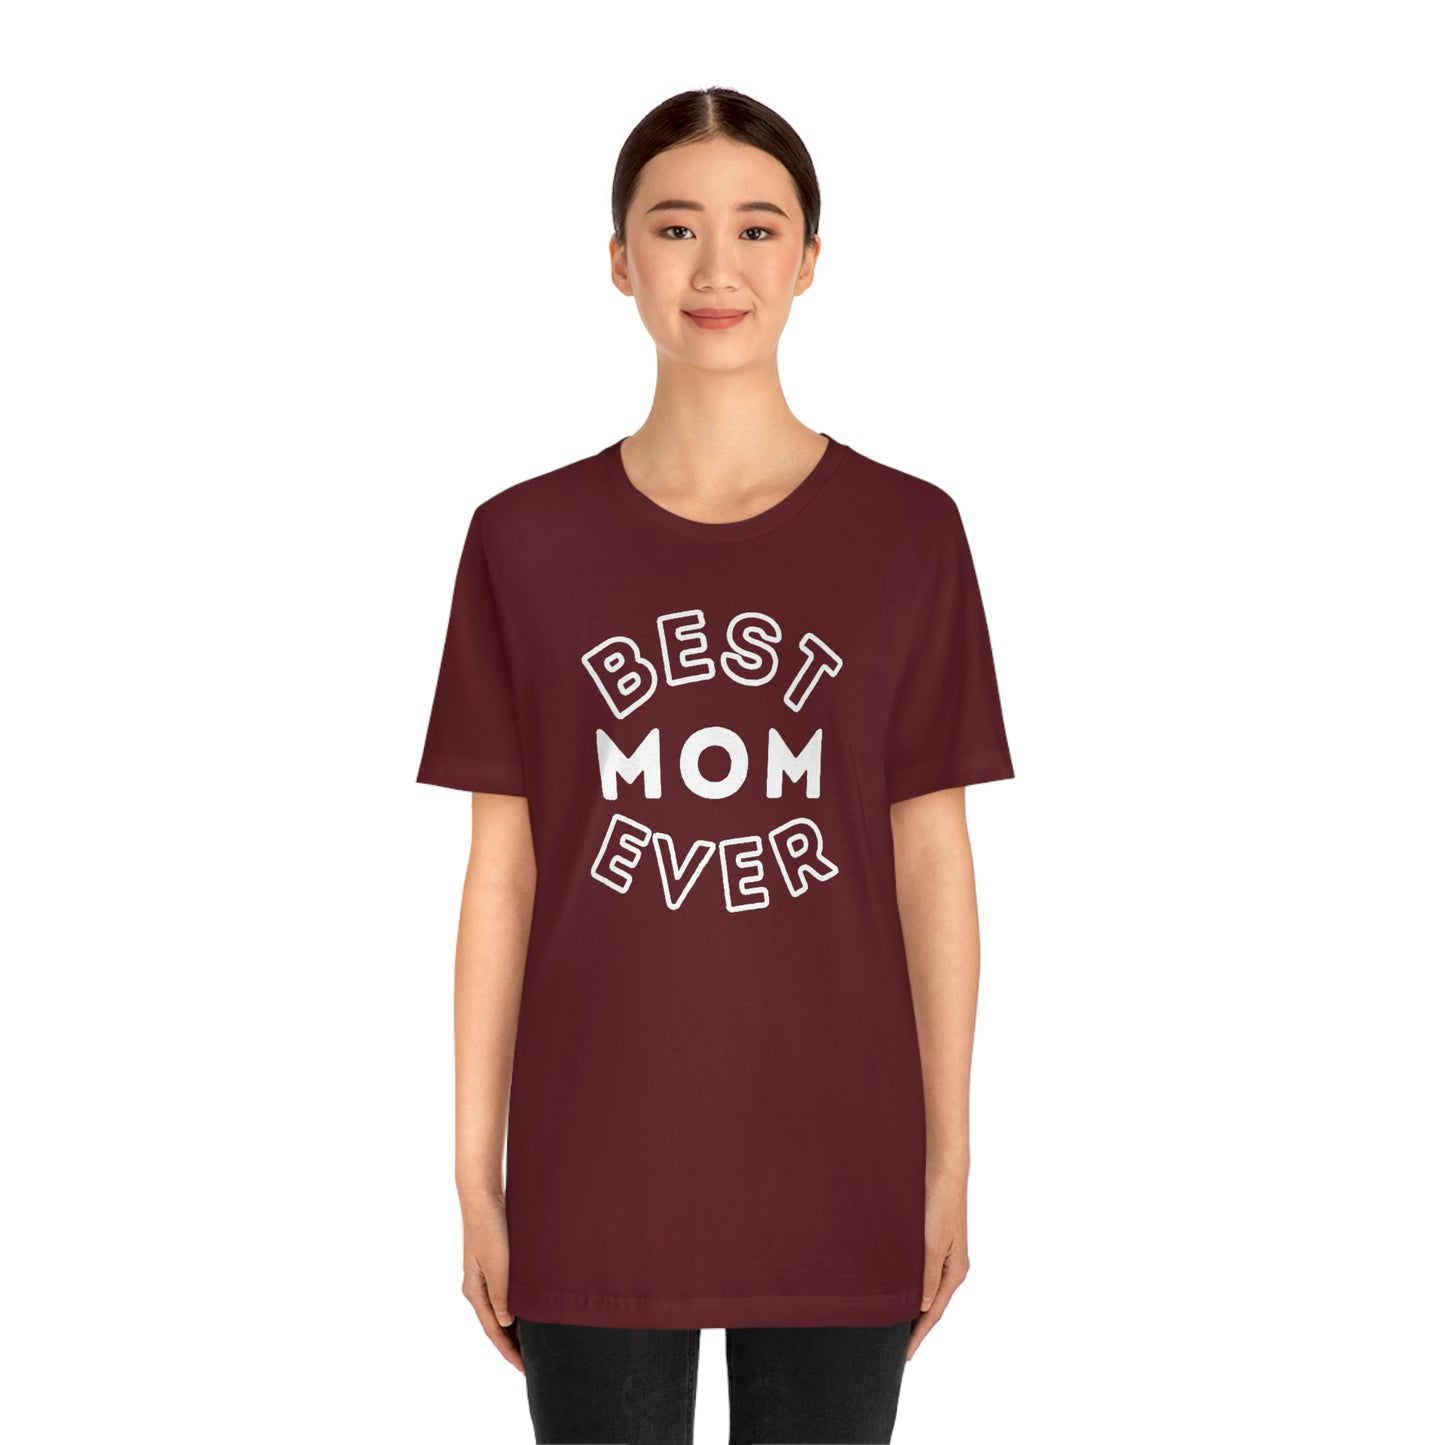 Best Mom Ever Shirt, Mothers day shirt, gift for mom, Mom birthday gift, Mothers day t shirts, Mothers shirts, Best mothers day gifta